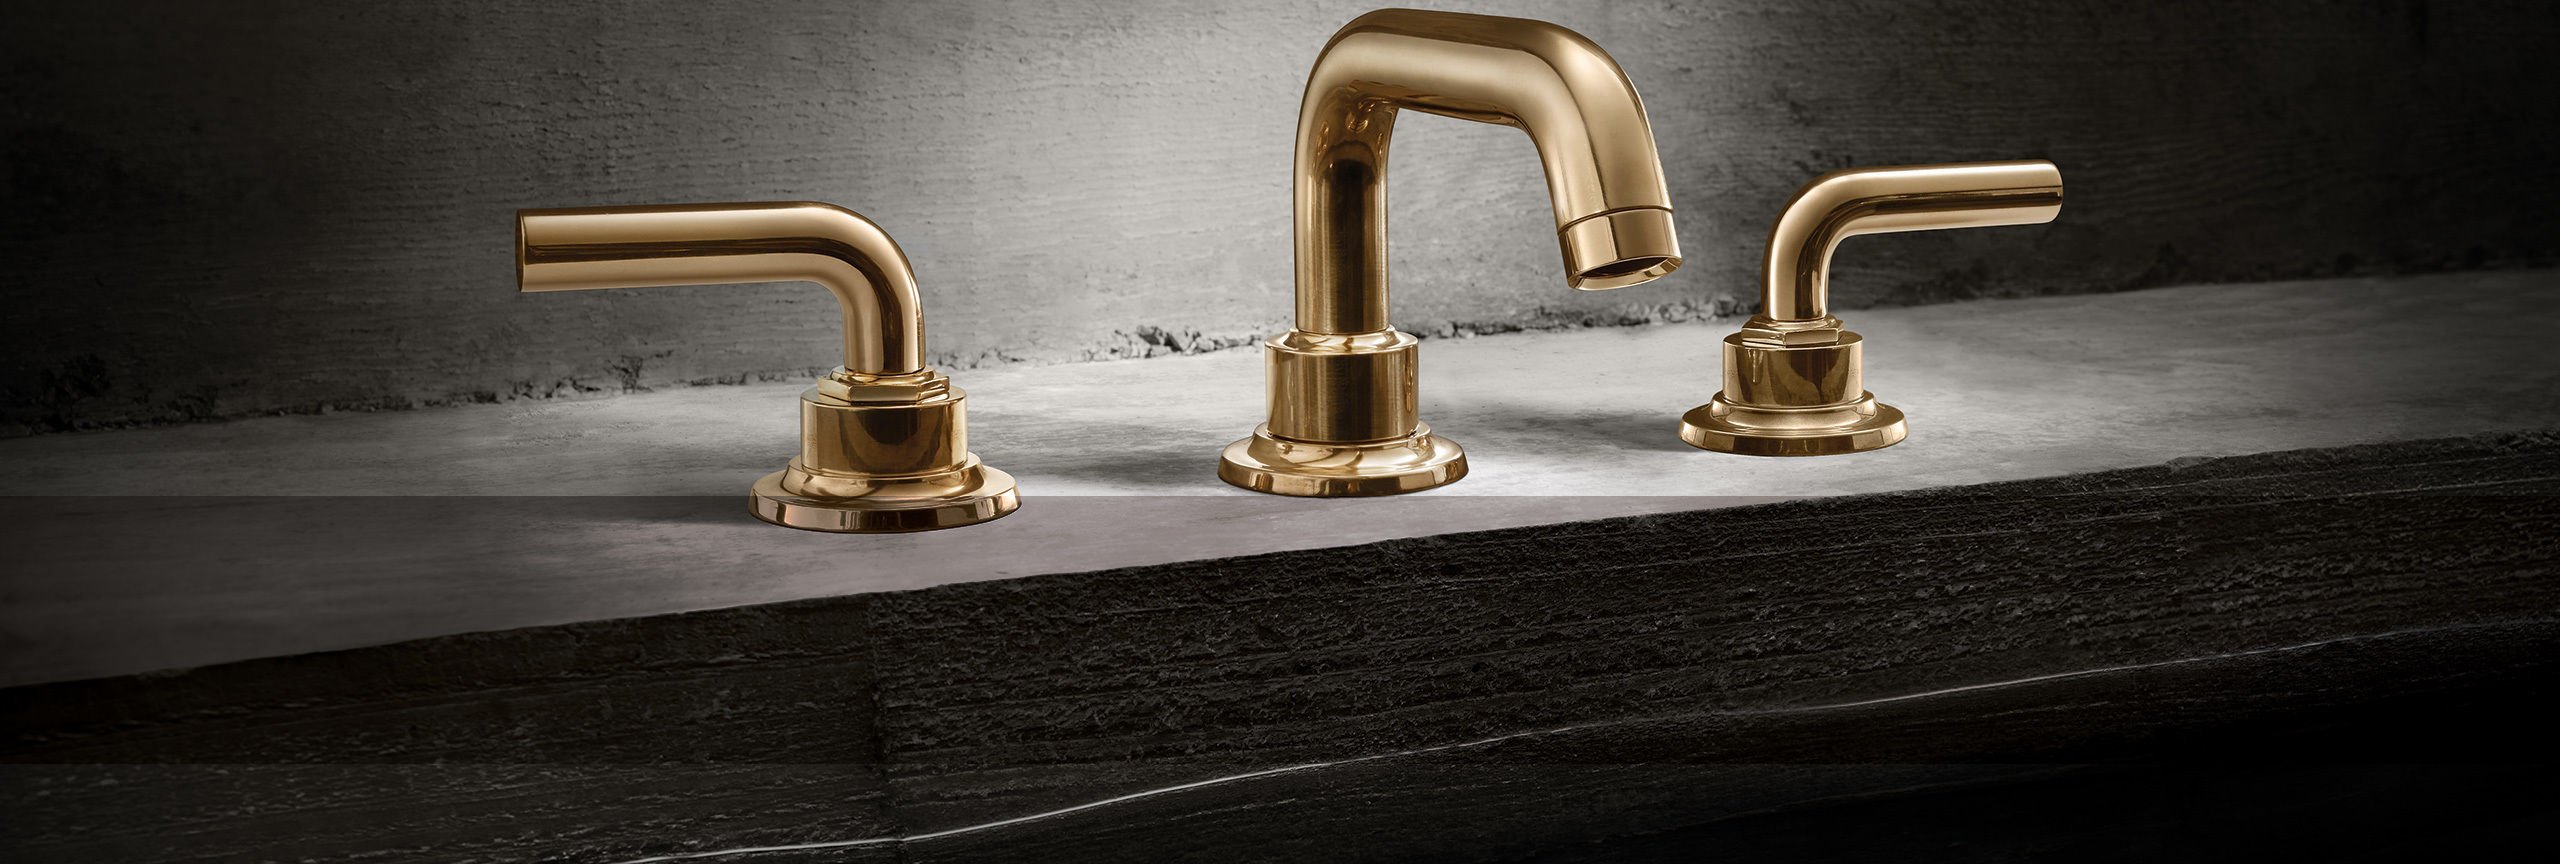 Descanso-burnished-brass-bathroom-faucets-page-header